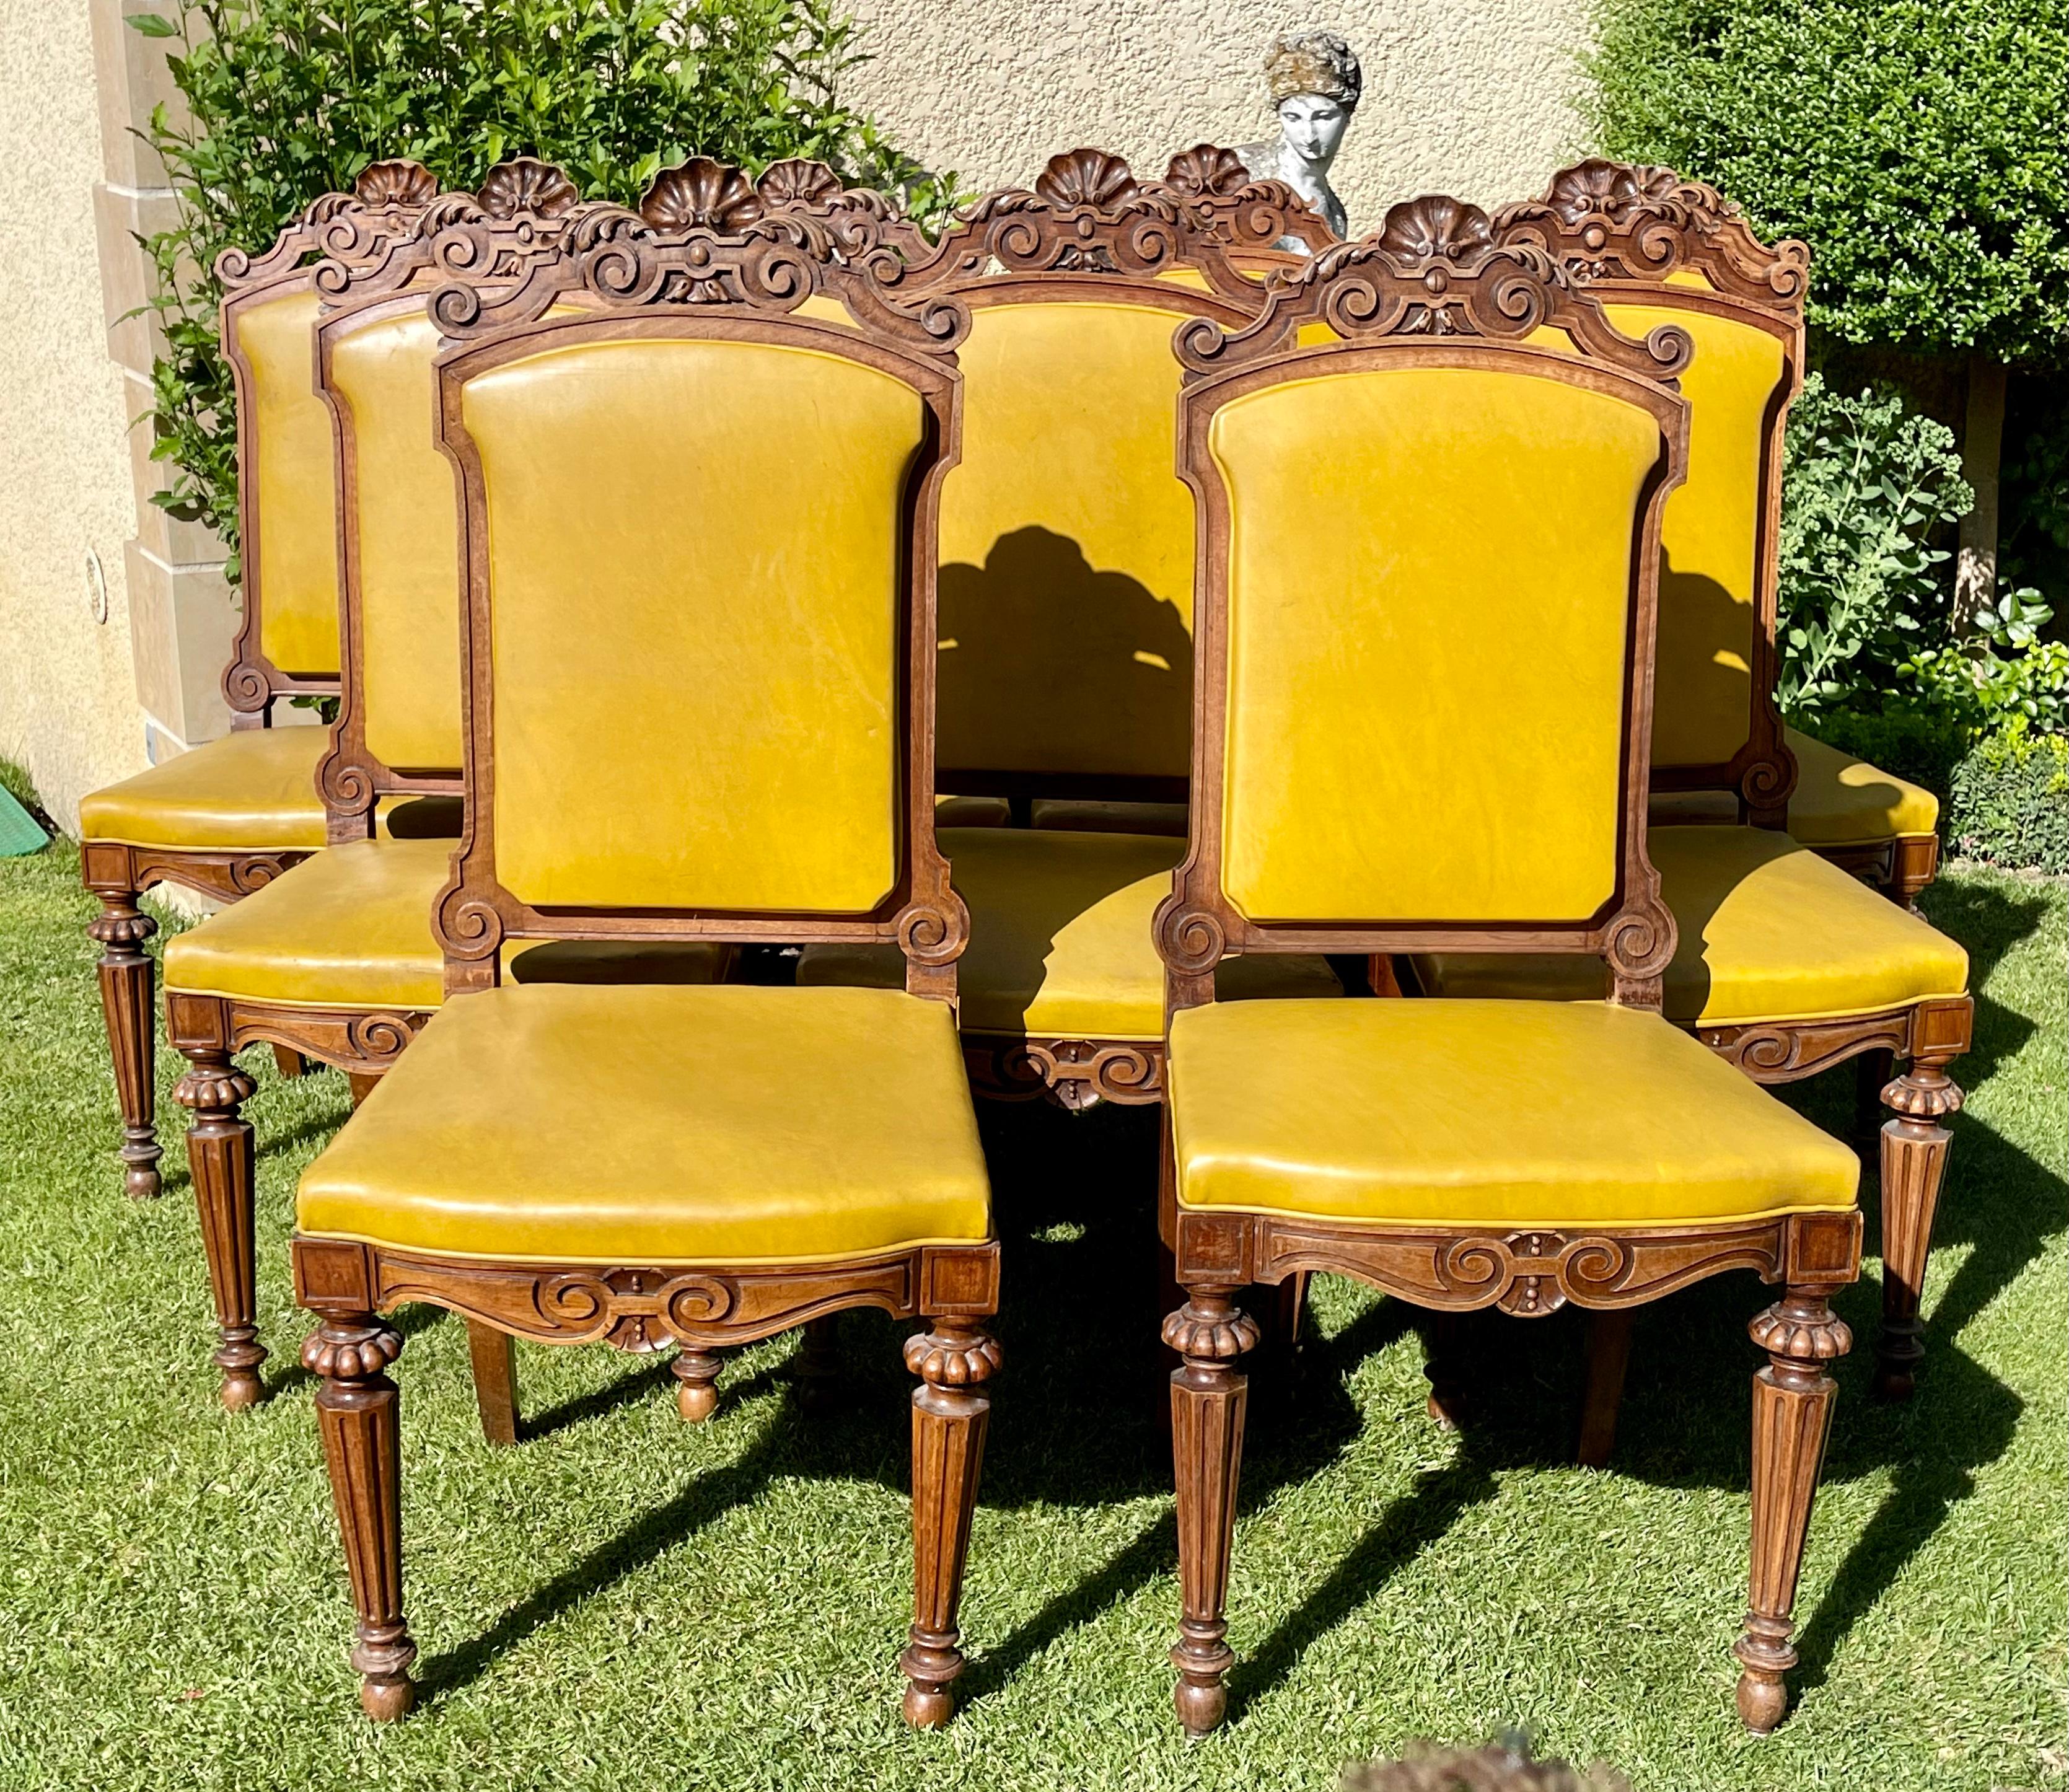 Suit of 9 carved walnut chairs Napoleon III period - XIXth. They are covered with mustard yellow imitation leather. The backrests and seats are made up of easily removable cakes. The whole is in good condition. 
To be noted - some shells on top of